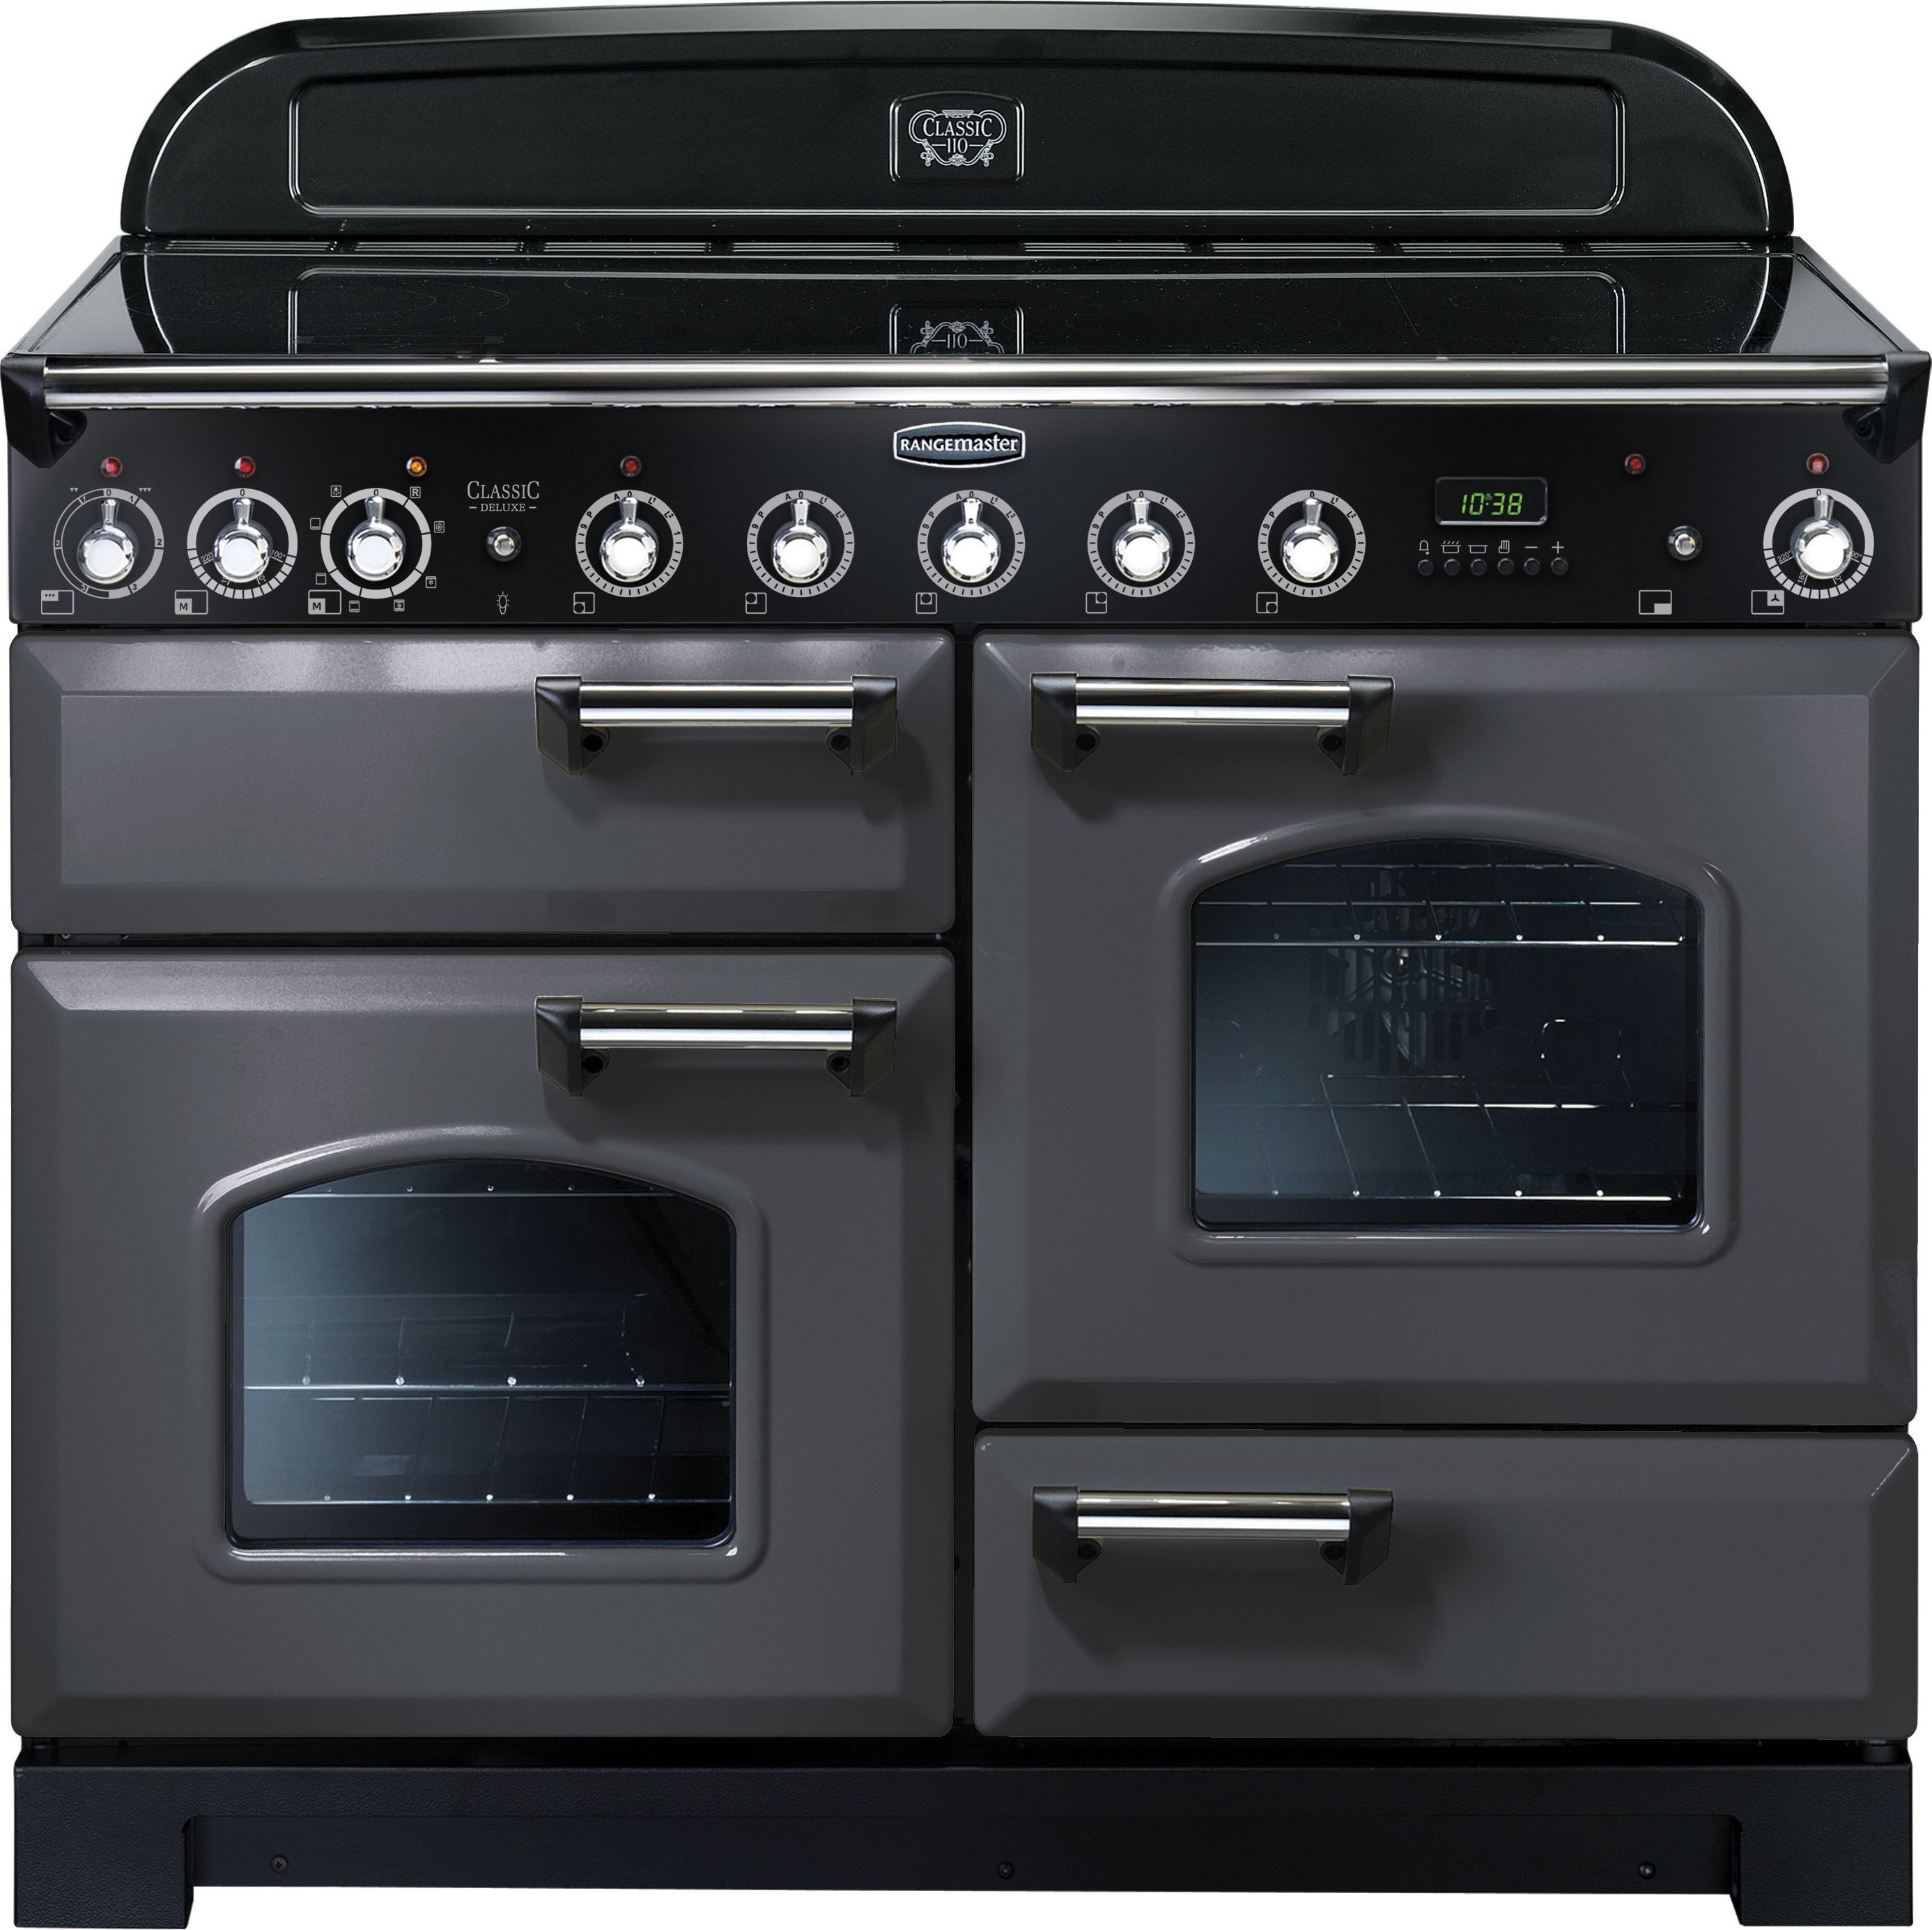 Rangemaster Classic Deluxe CDL110EISL/C 110cm Electric Range Cooker with Induction Hob - Slate Grey / Chrome - A/A Rated, Grey